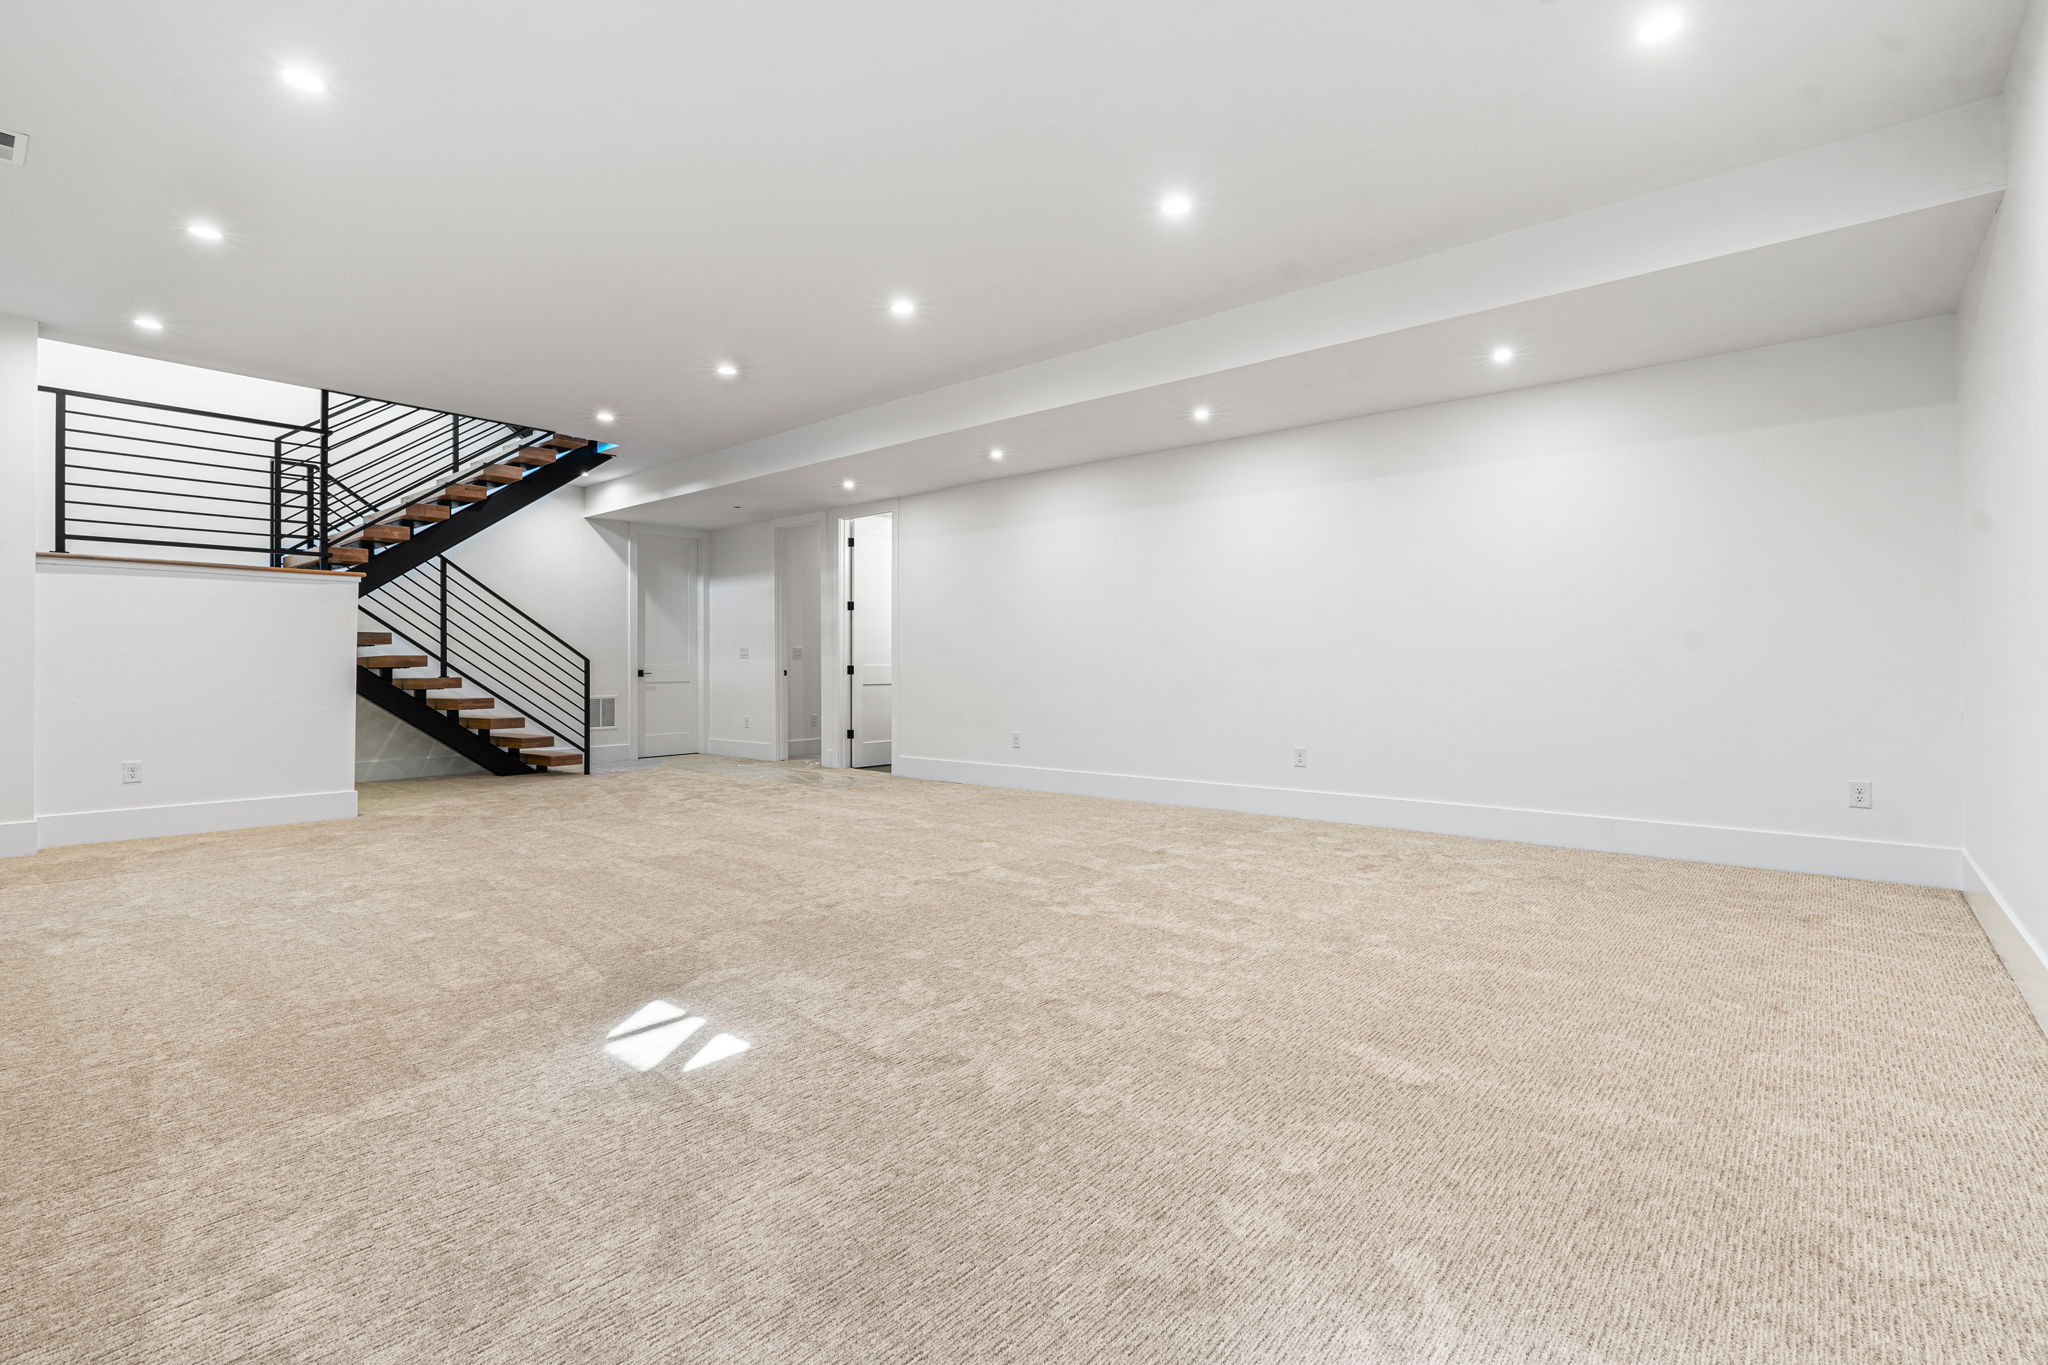 This versatile, expansive rec room flaunts 9.5' ceilings with unlimited possibilities & is awaiting your personal touch.